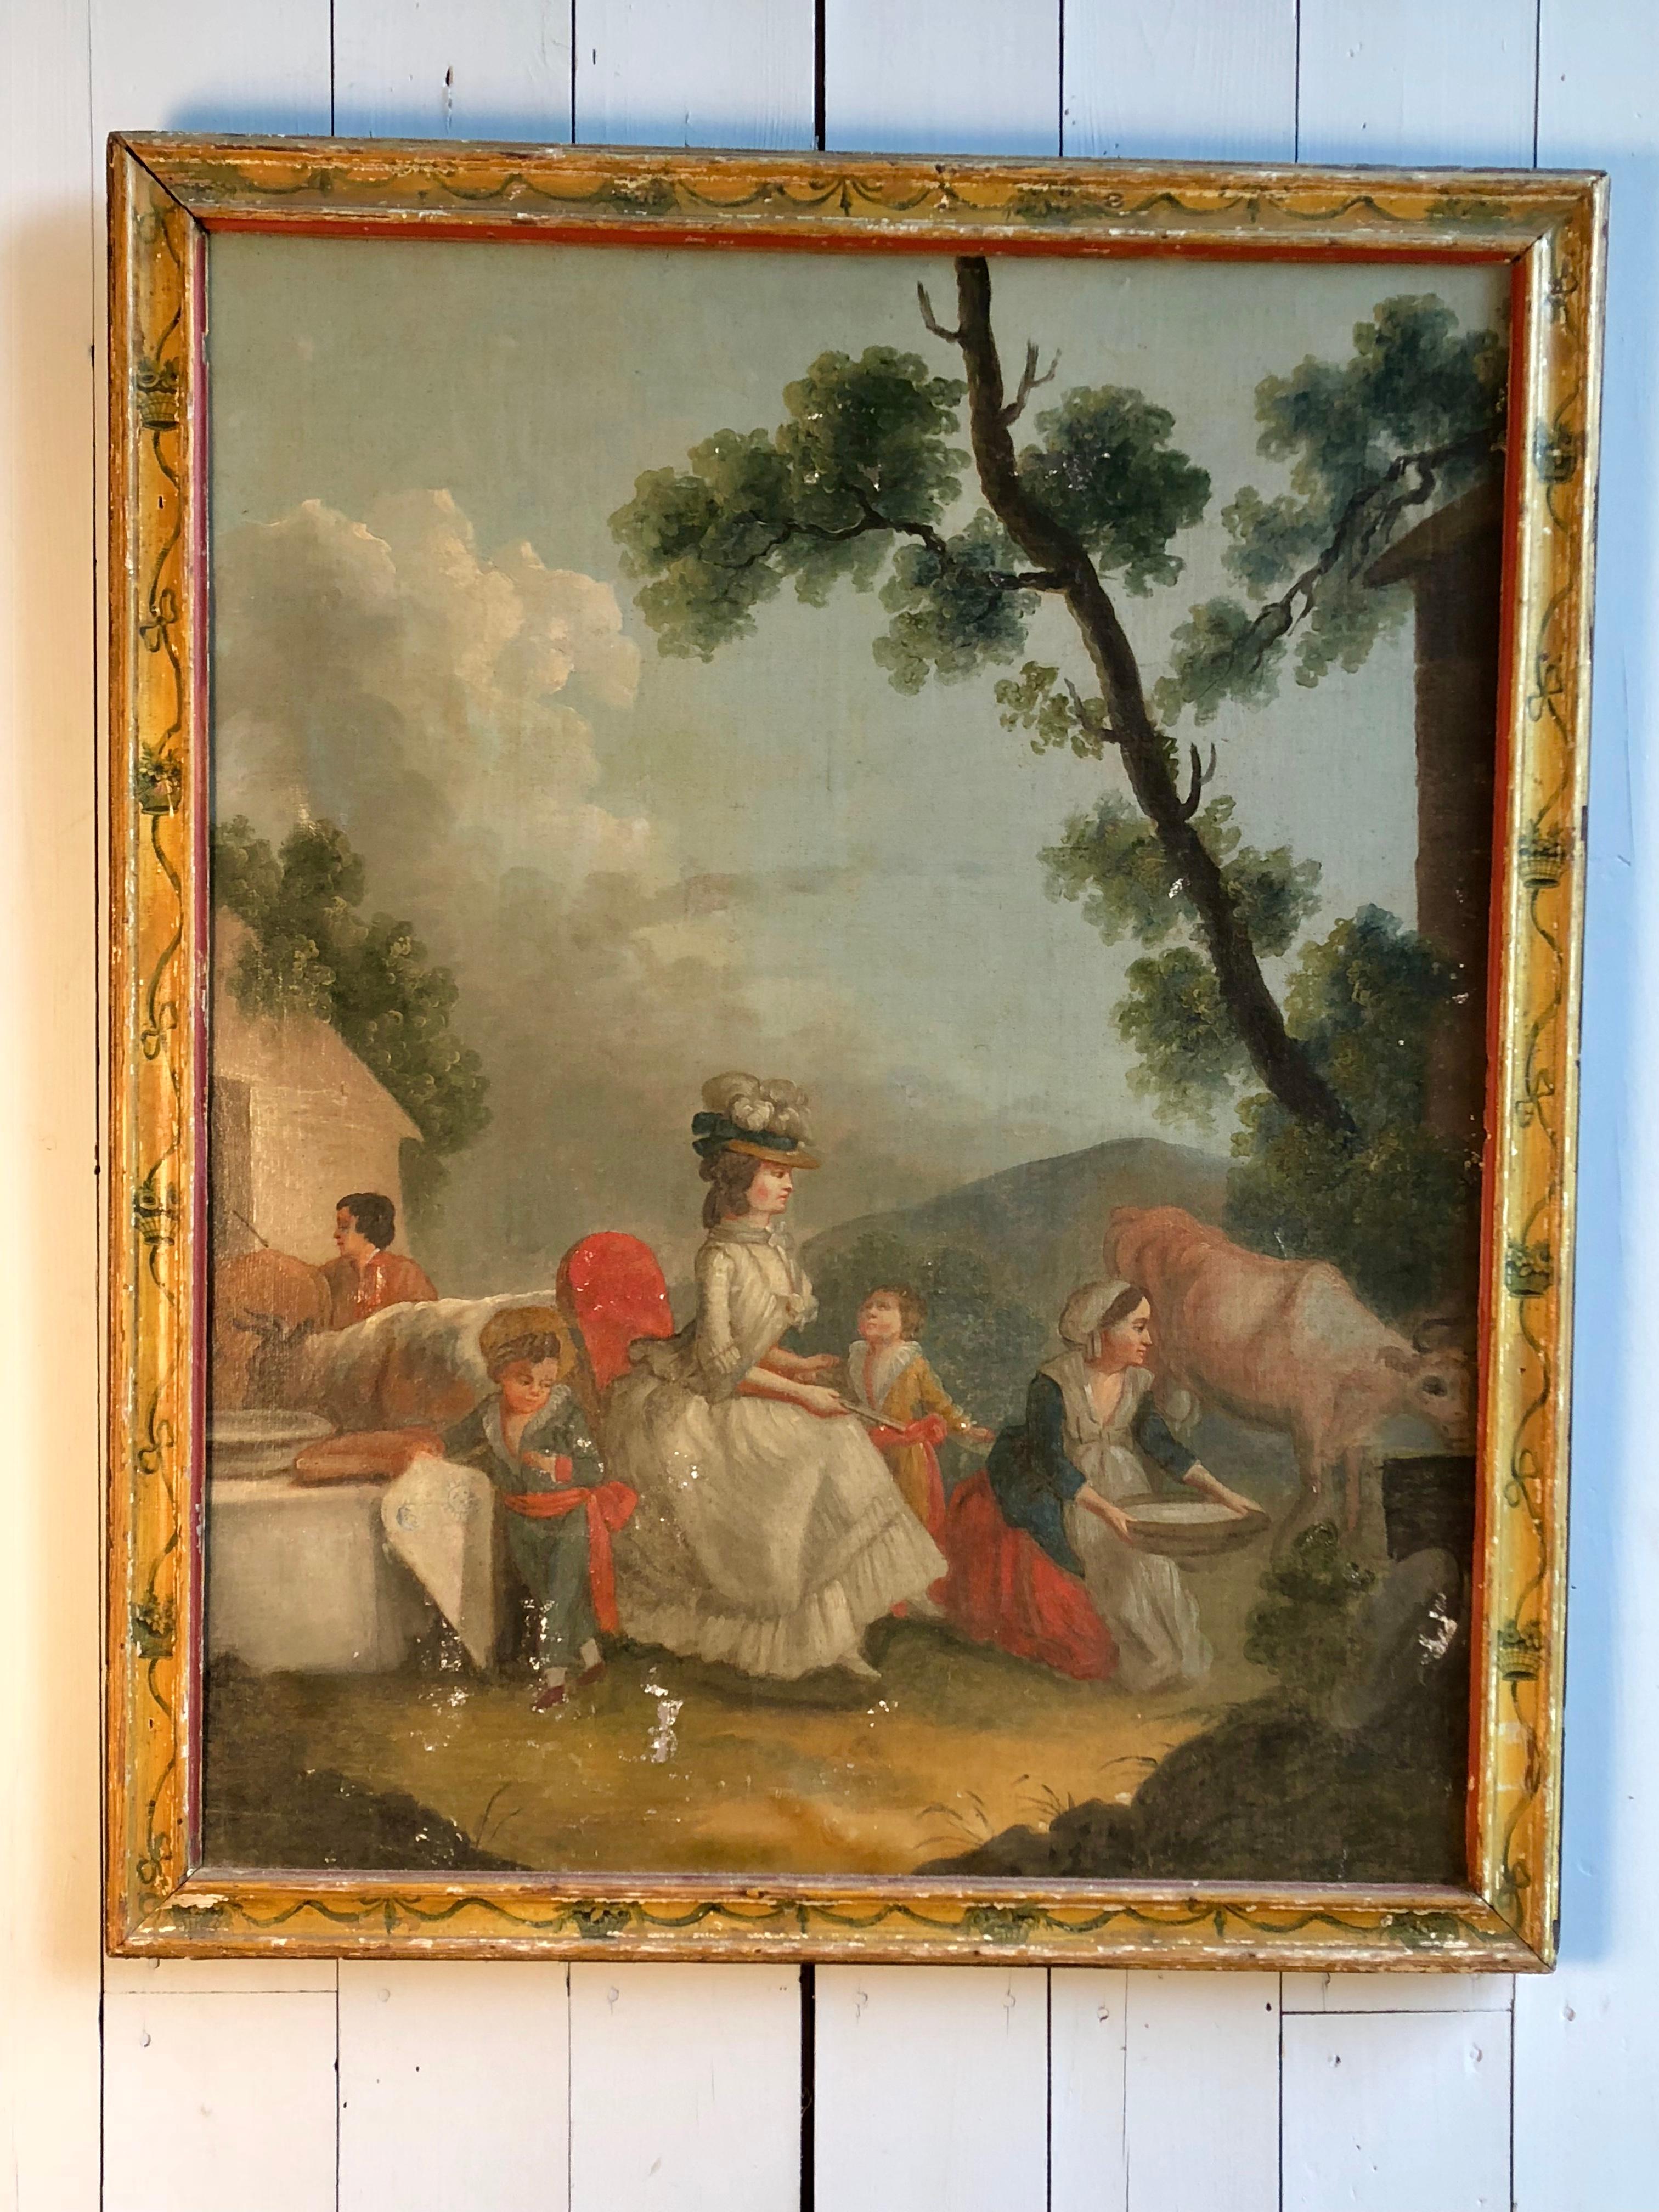 A charming 18th Century French Provincial farm scene of Marie Antoinette at the “Petite Hameau” at Versailles. She is depicted sitting amongst children playing, farm animals and milk maids. The frame is painted yellow with green flower baskets and